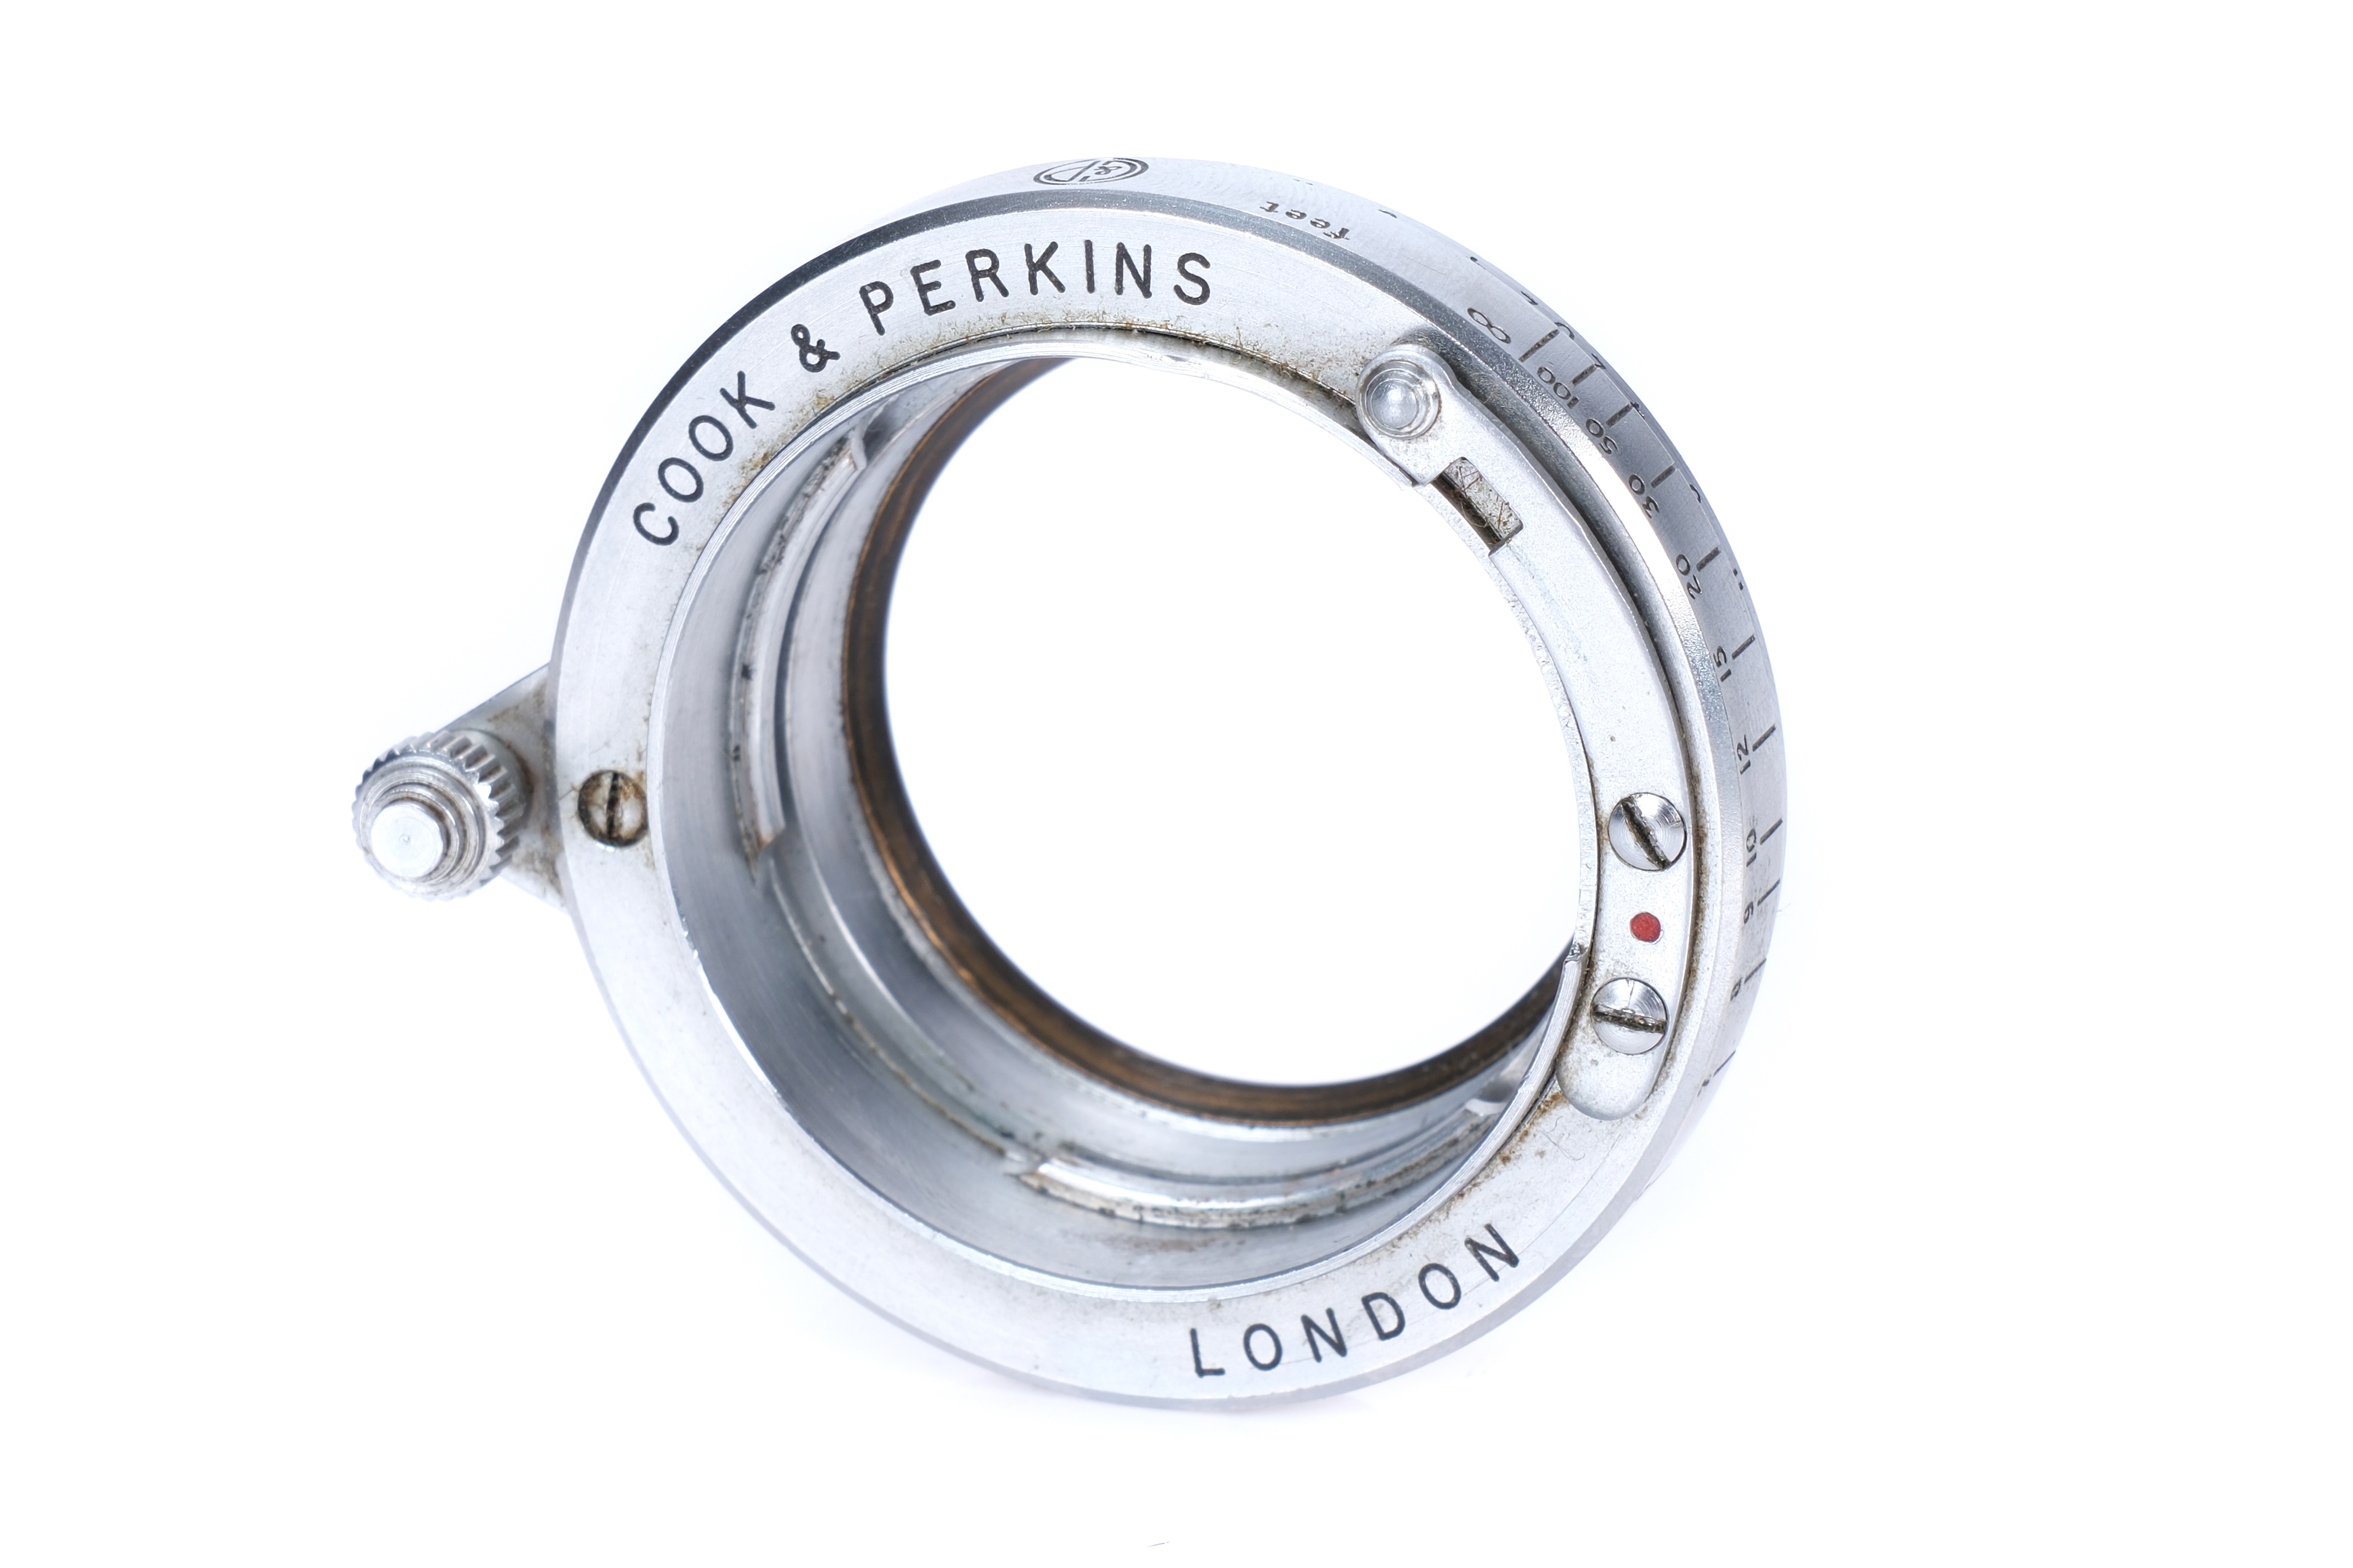 A Cook & Perkins Lens Adapter, - Image 3 of 4